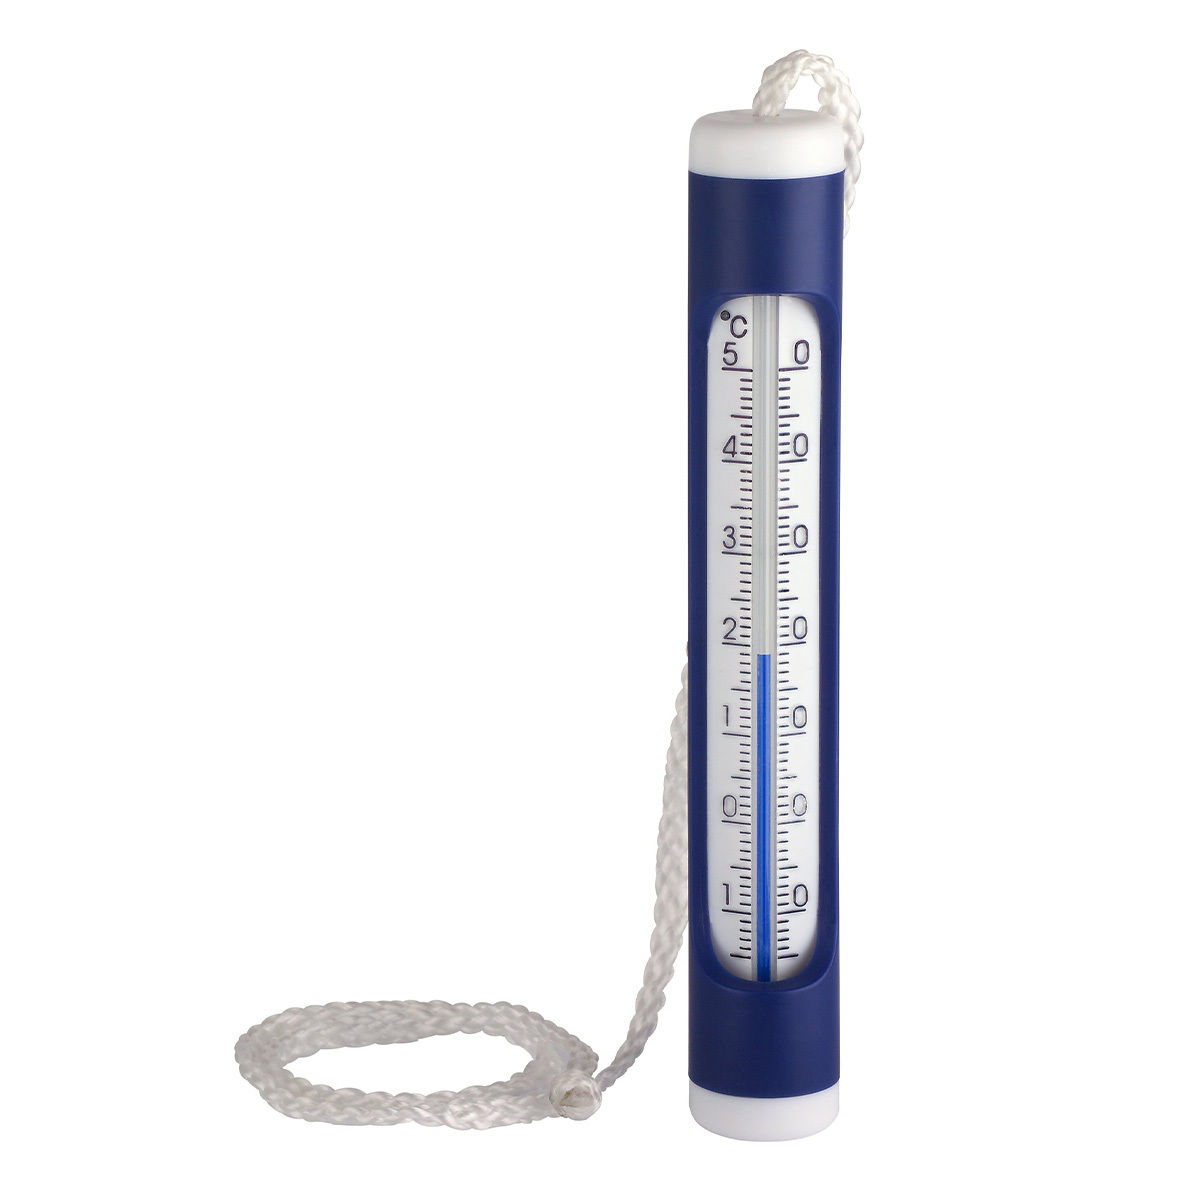 40-2004-analoges-schwimmbad-teichthermometer-1200x1200px.jpg